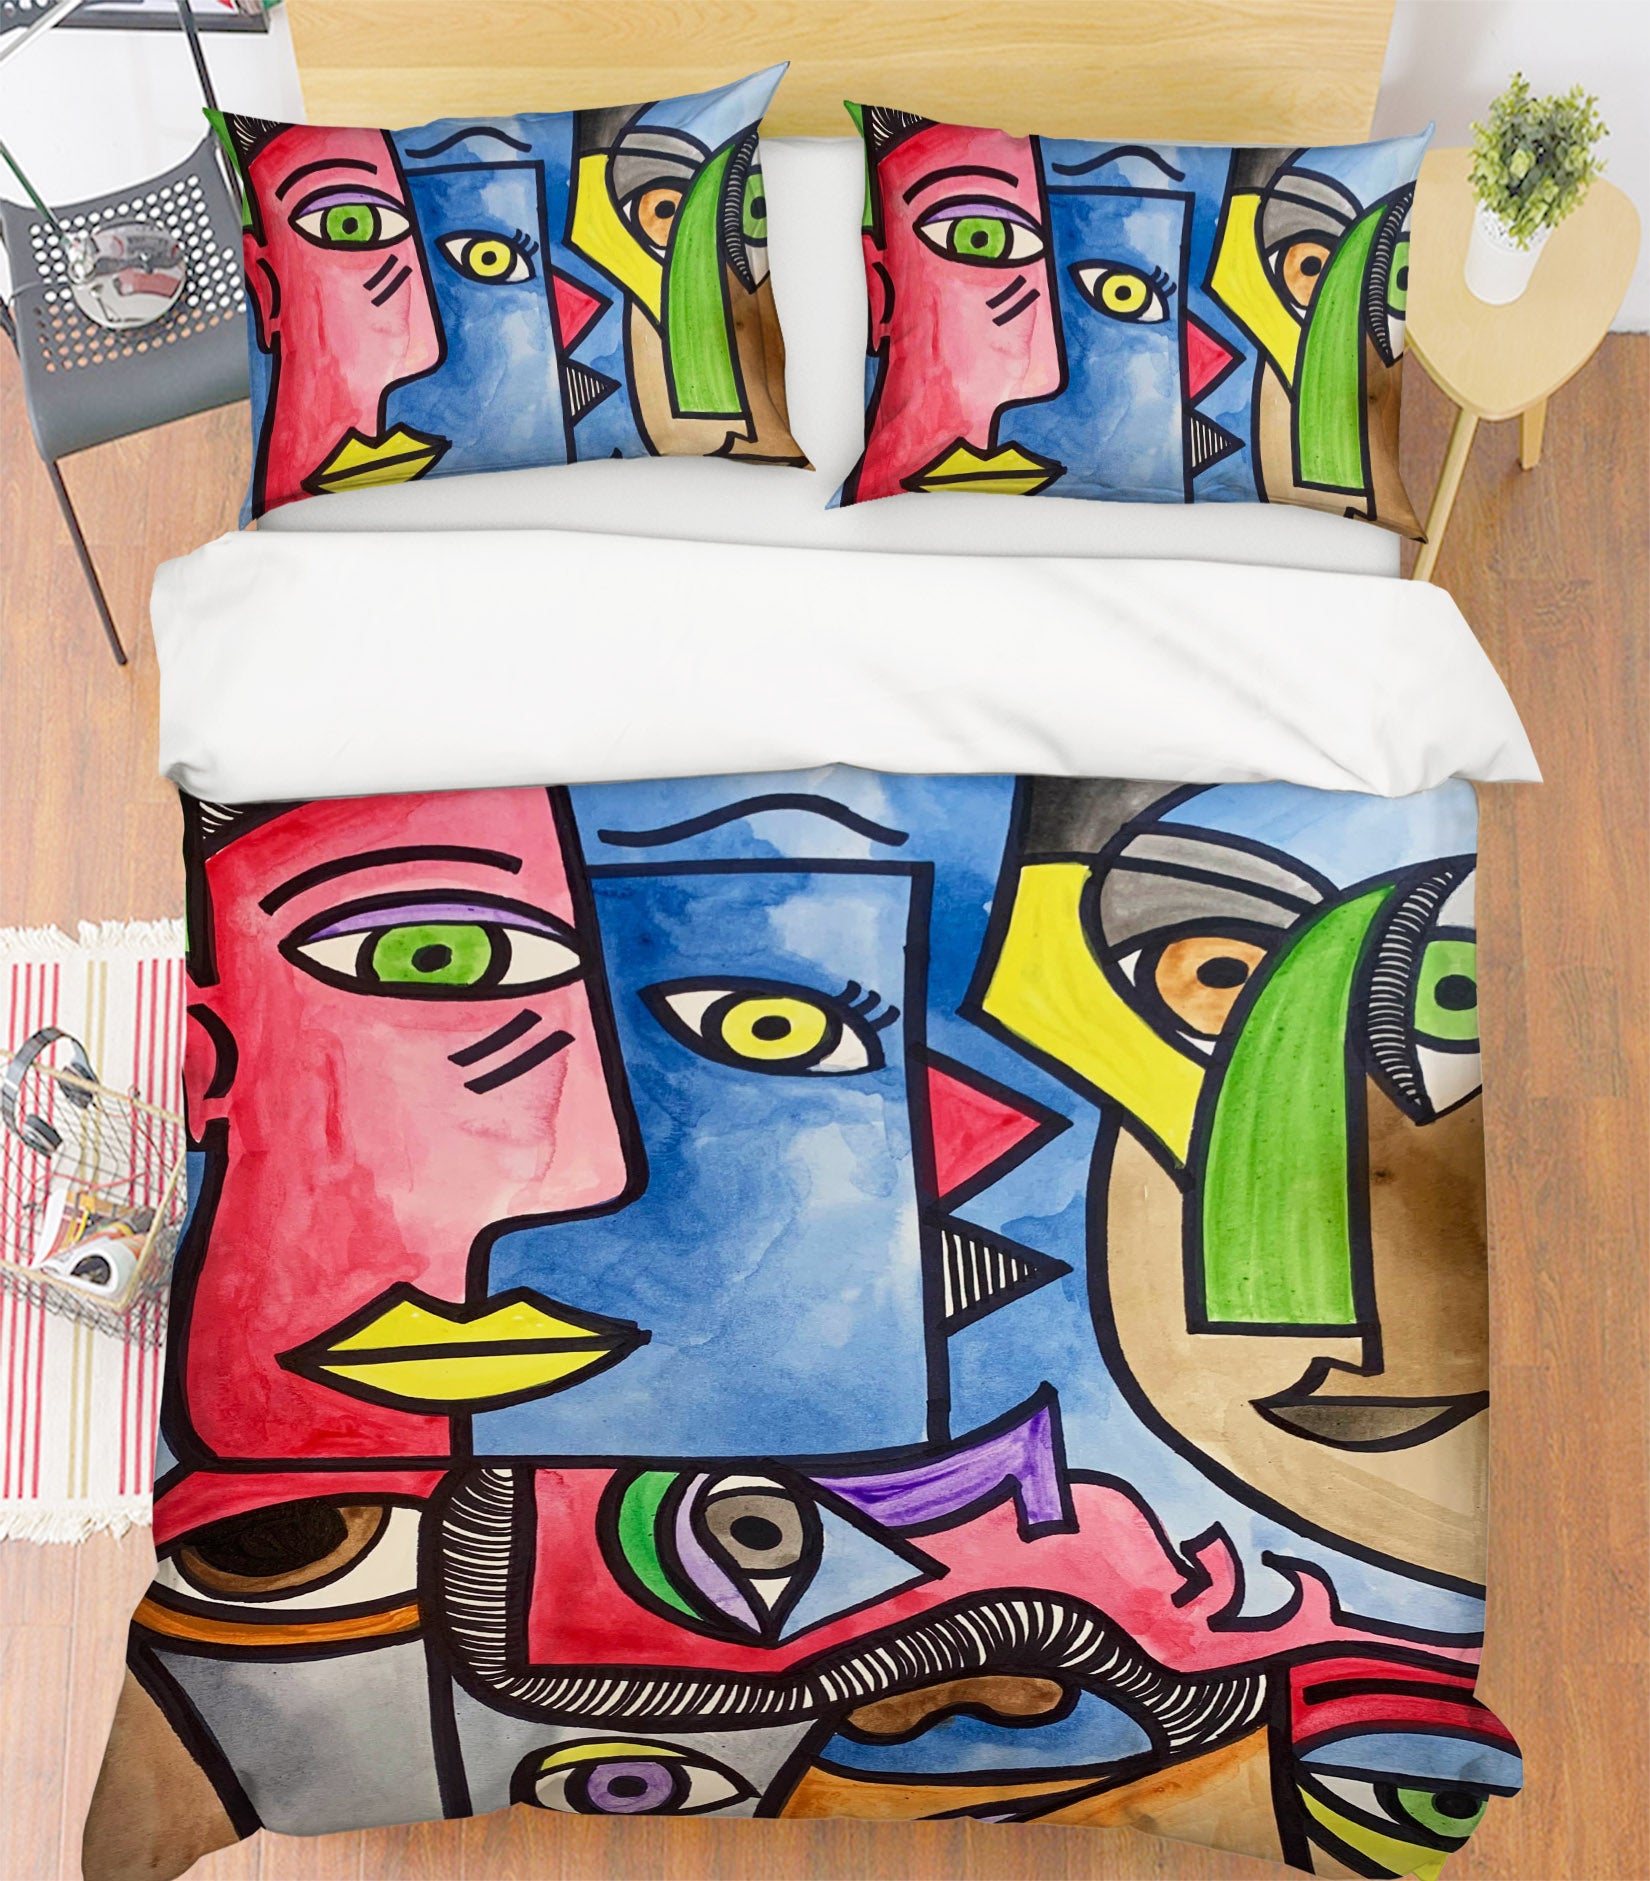 3D Abstract Caricature 3028 Jacqueline Reynoso Bedding Bed Pillowcases Quilt Cover Duvet Cover